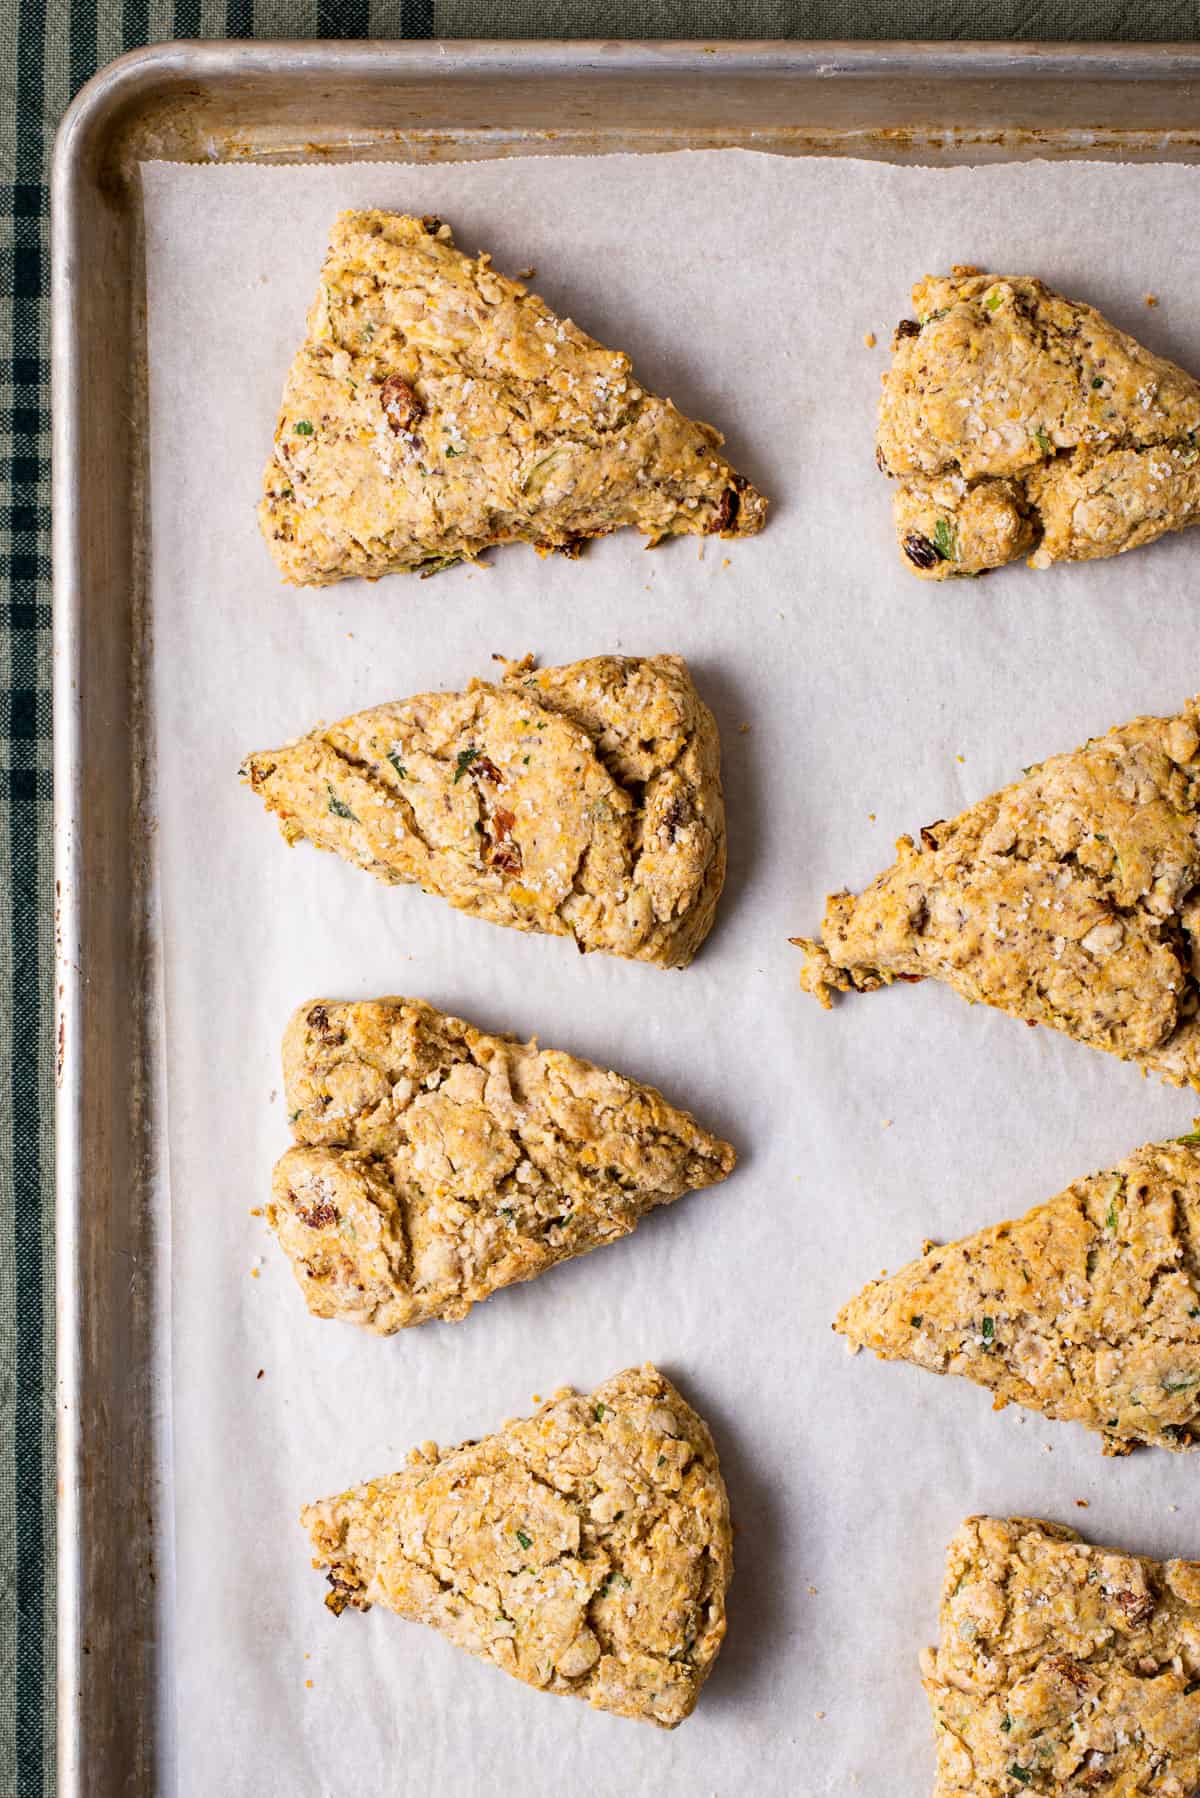 Savory vegan scones on a baking sheet with parchment paper.